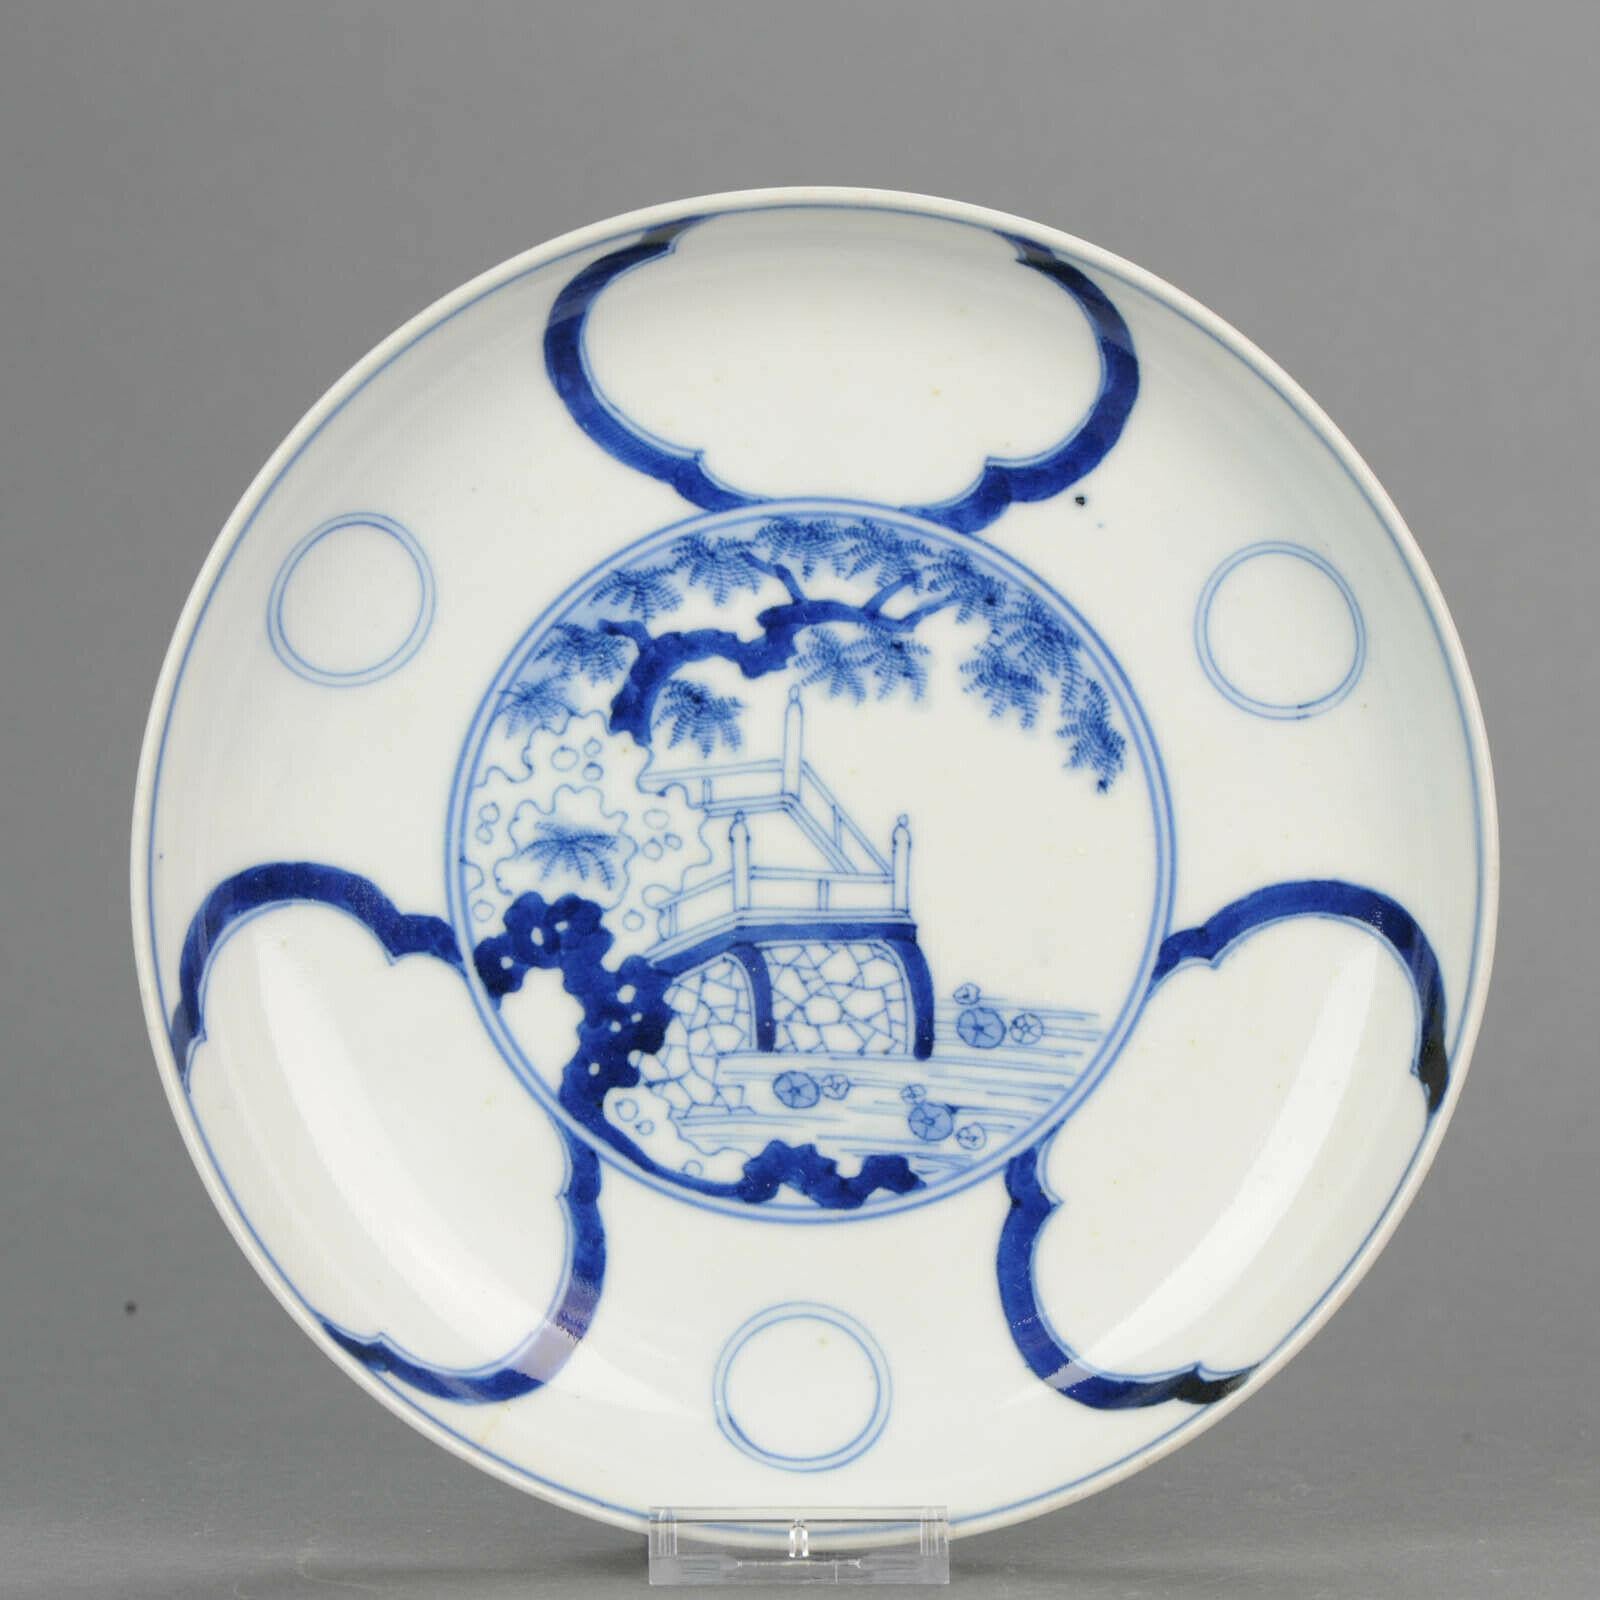 Set of Chinese Blue and White Plate for Wall Decoration Porcelain China In Good Condition For Sale In Amsterdam, Noord Holland